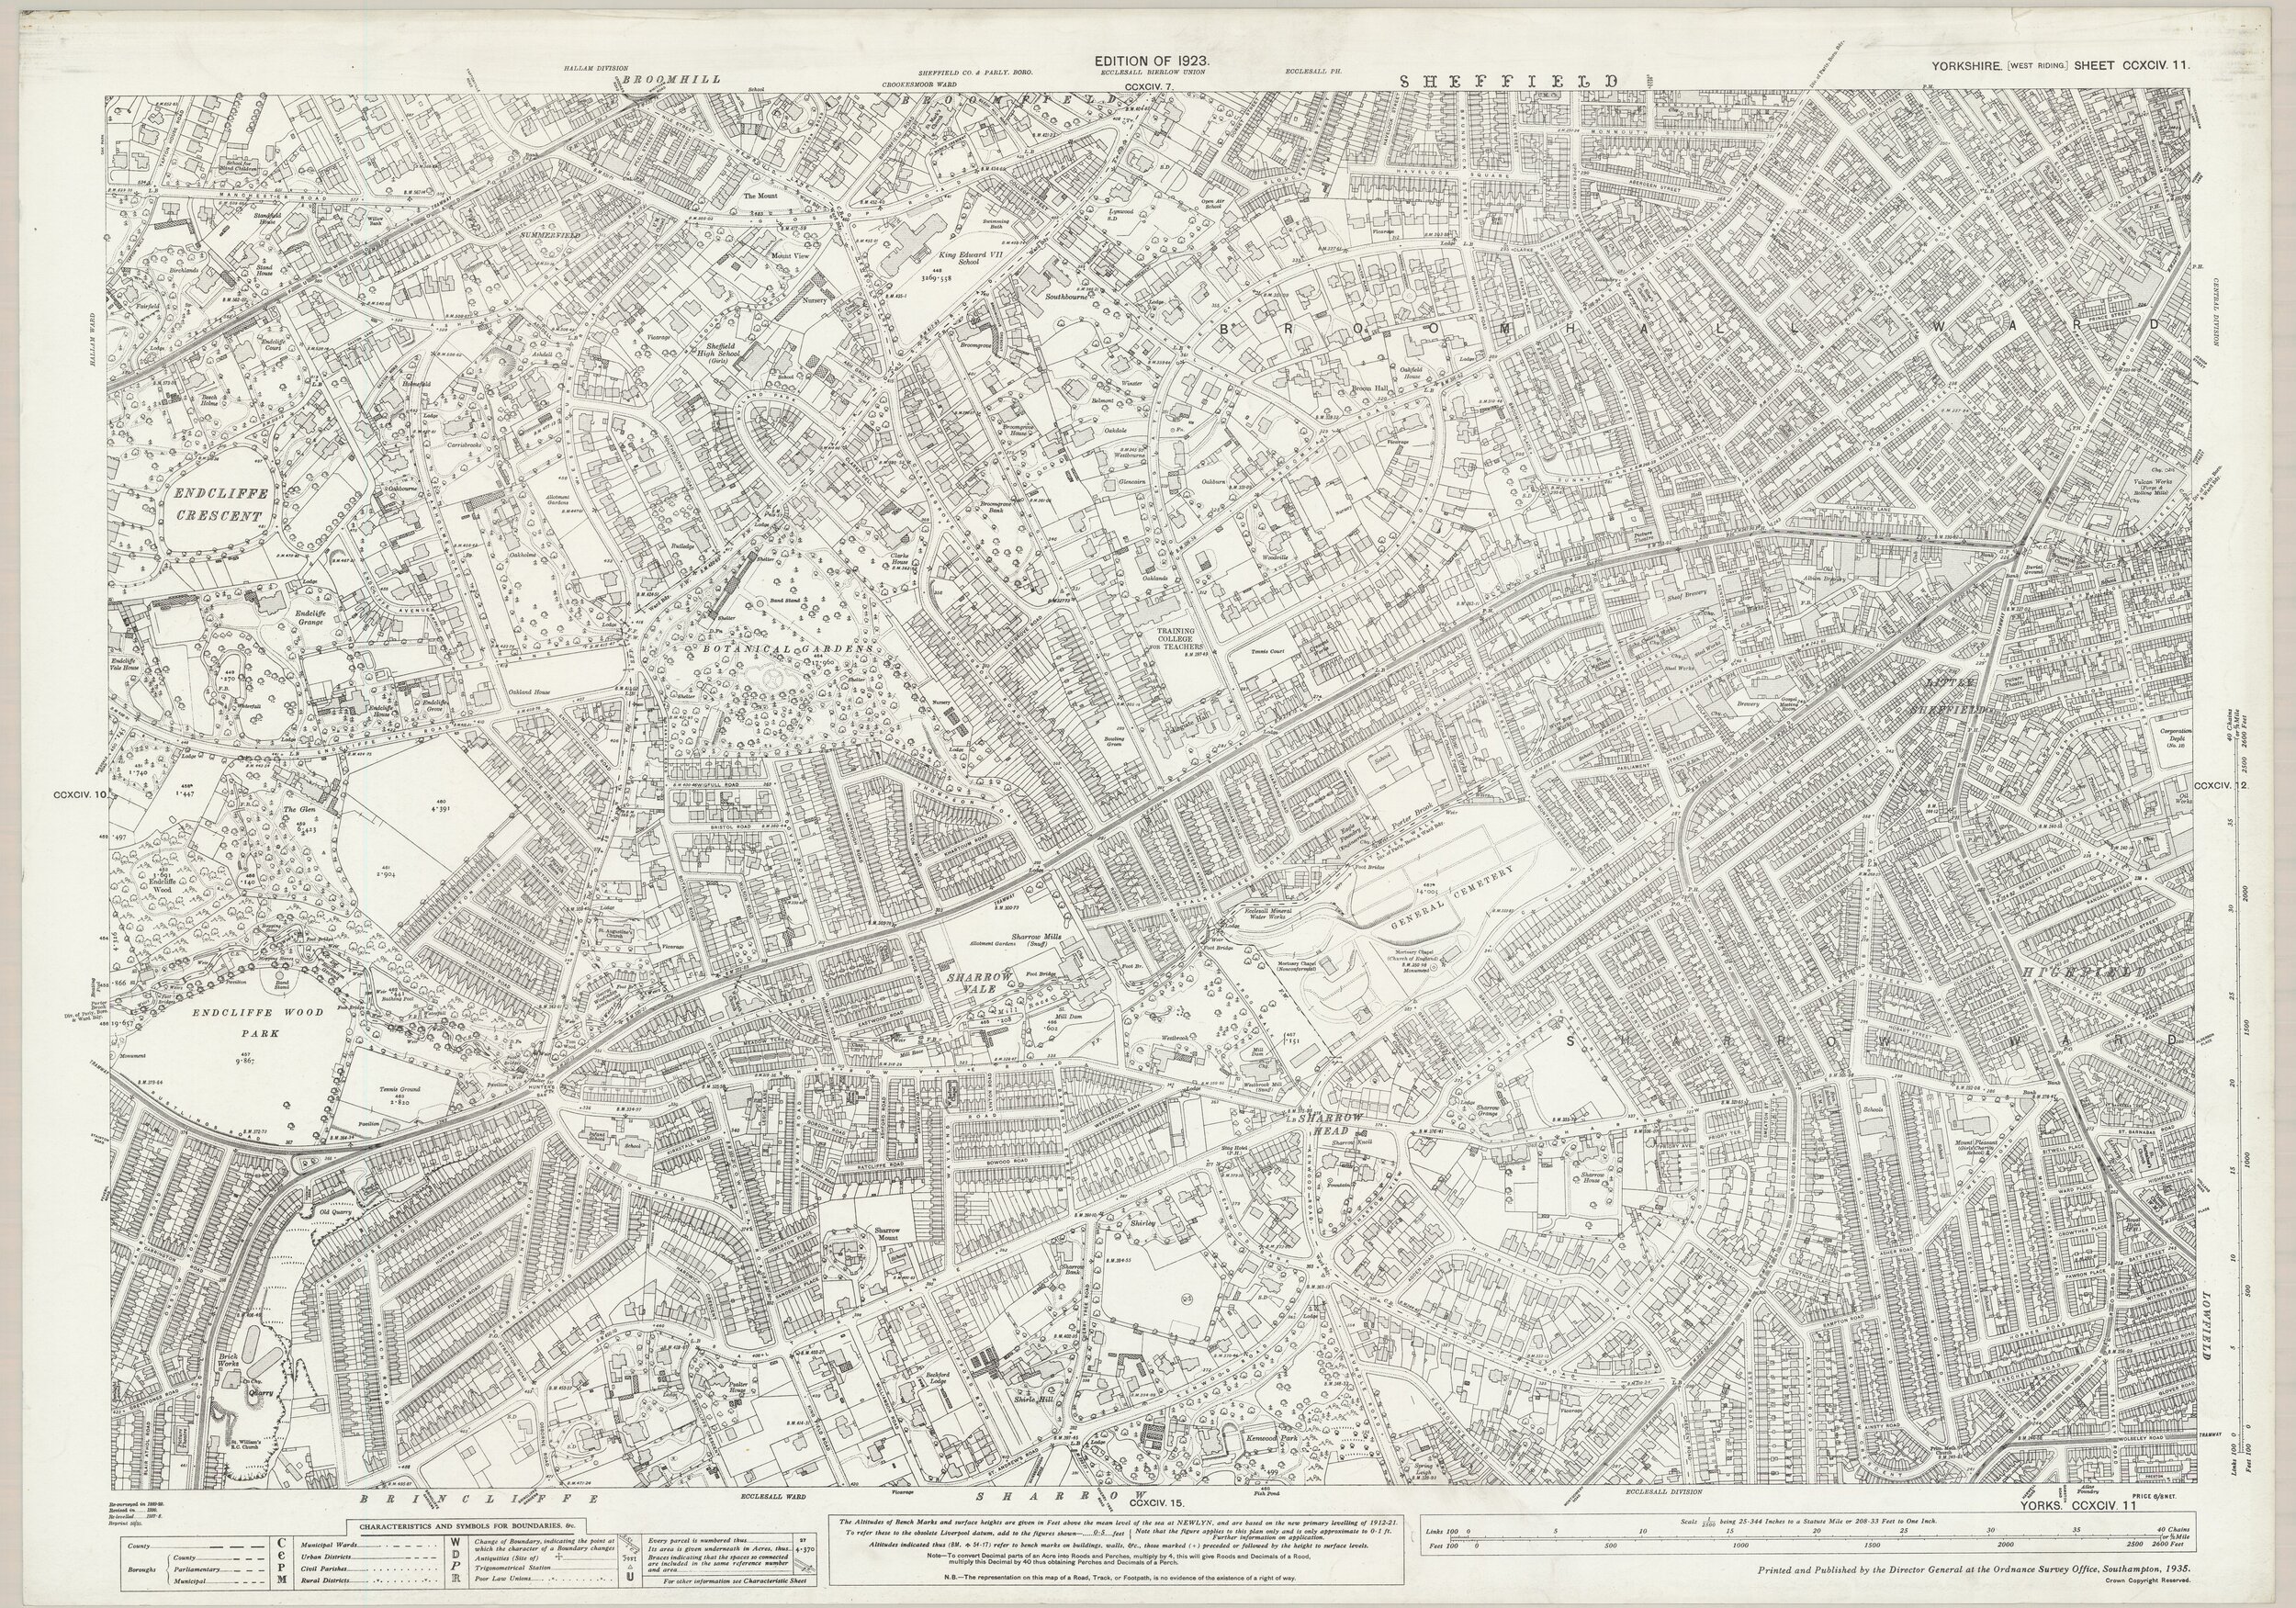 OS Map of Broomgrove Road and Surrounding Areas - 1923